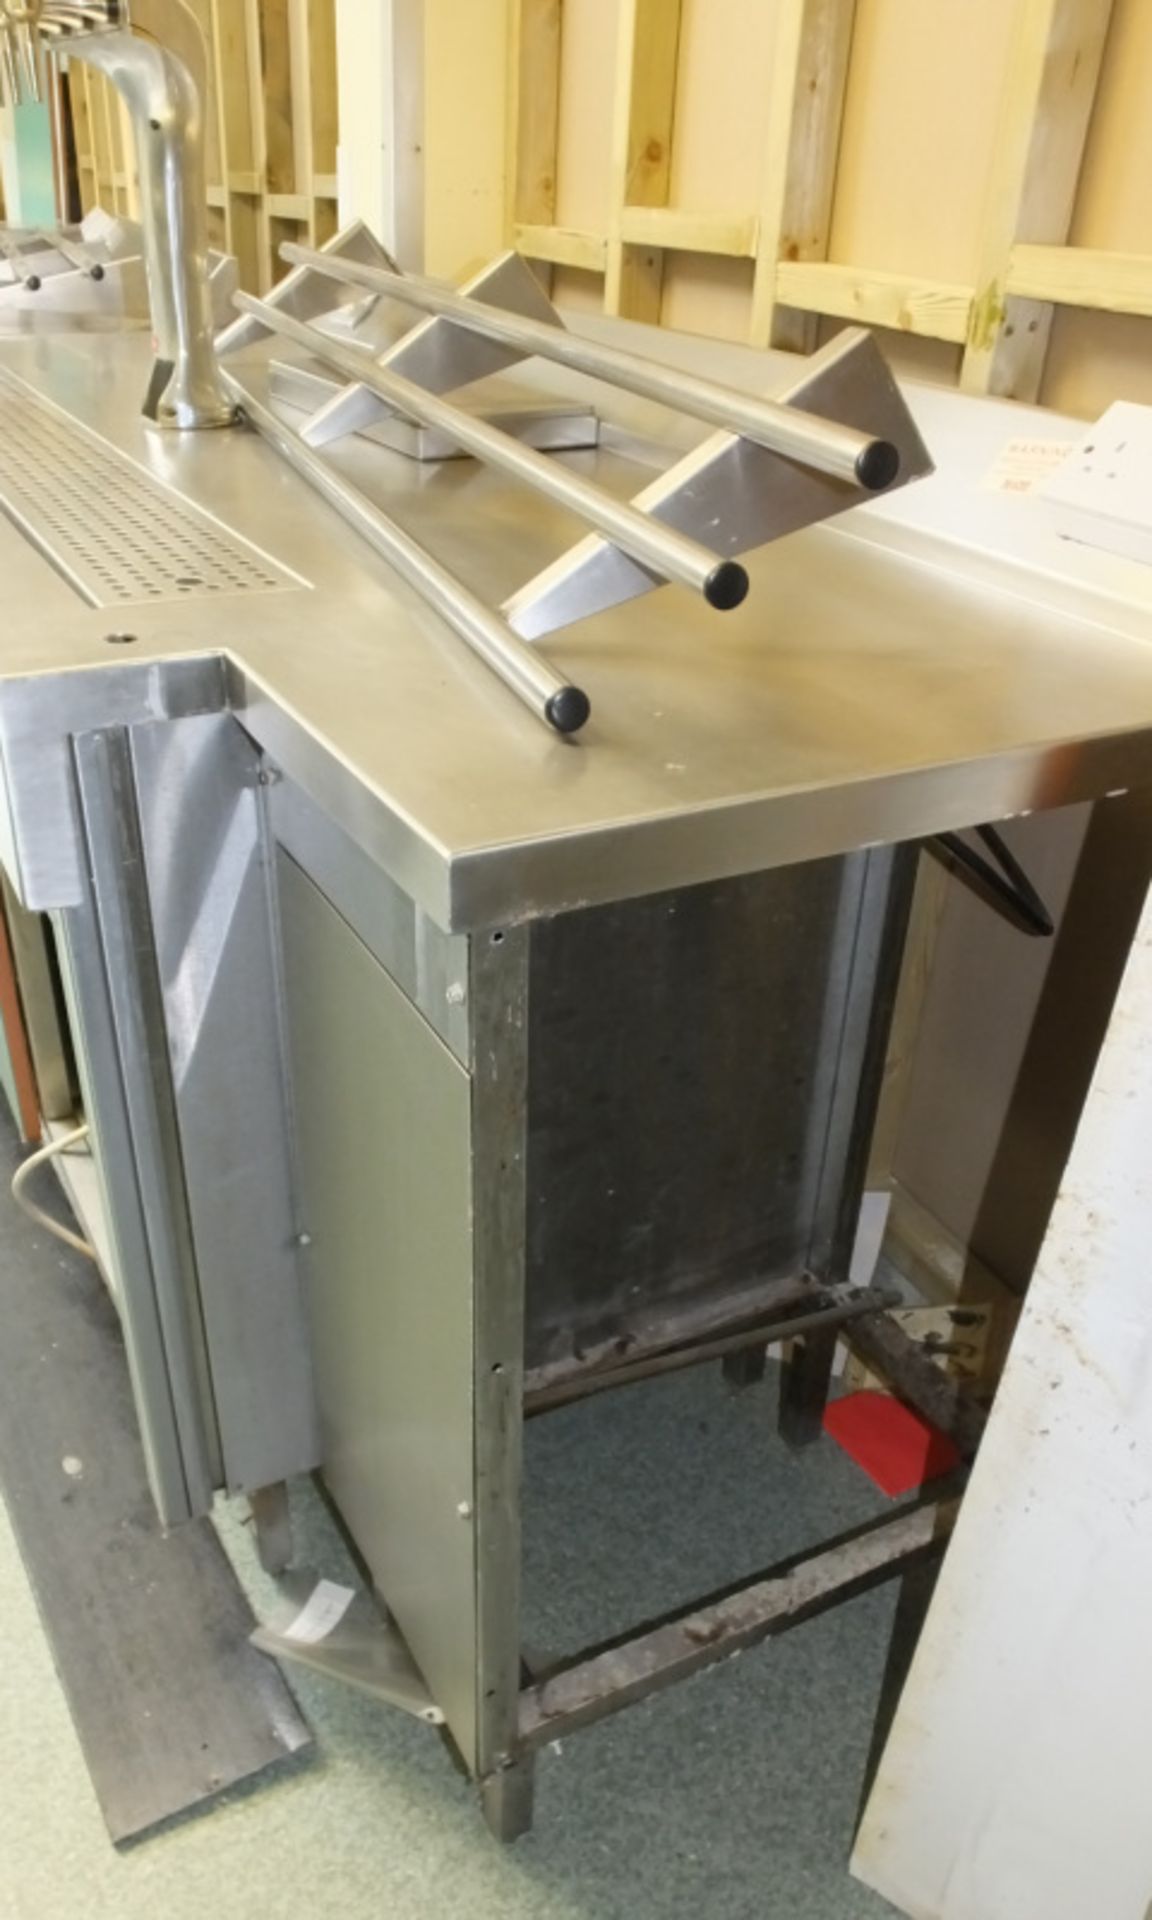 Tray Rack Servery Unit with Juice Dispenser and Sockets - L2000 x D800 x H1020mm - Image 6 of 6